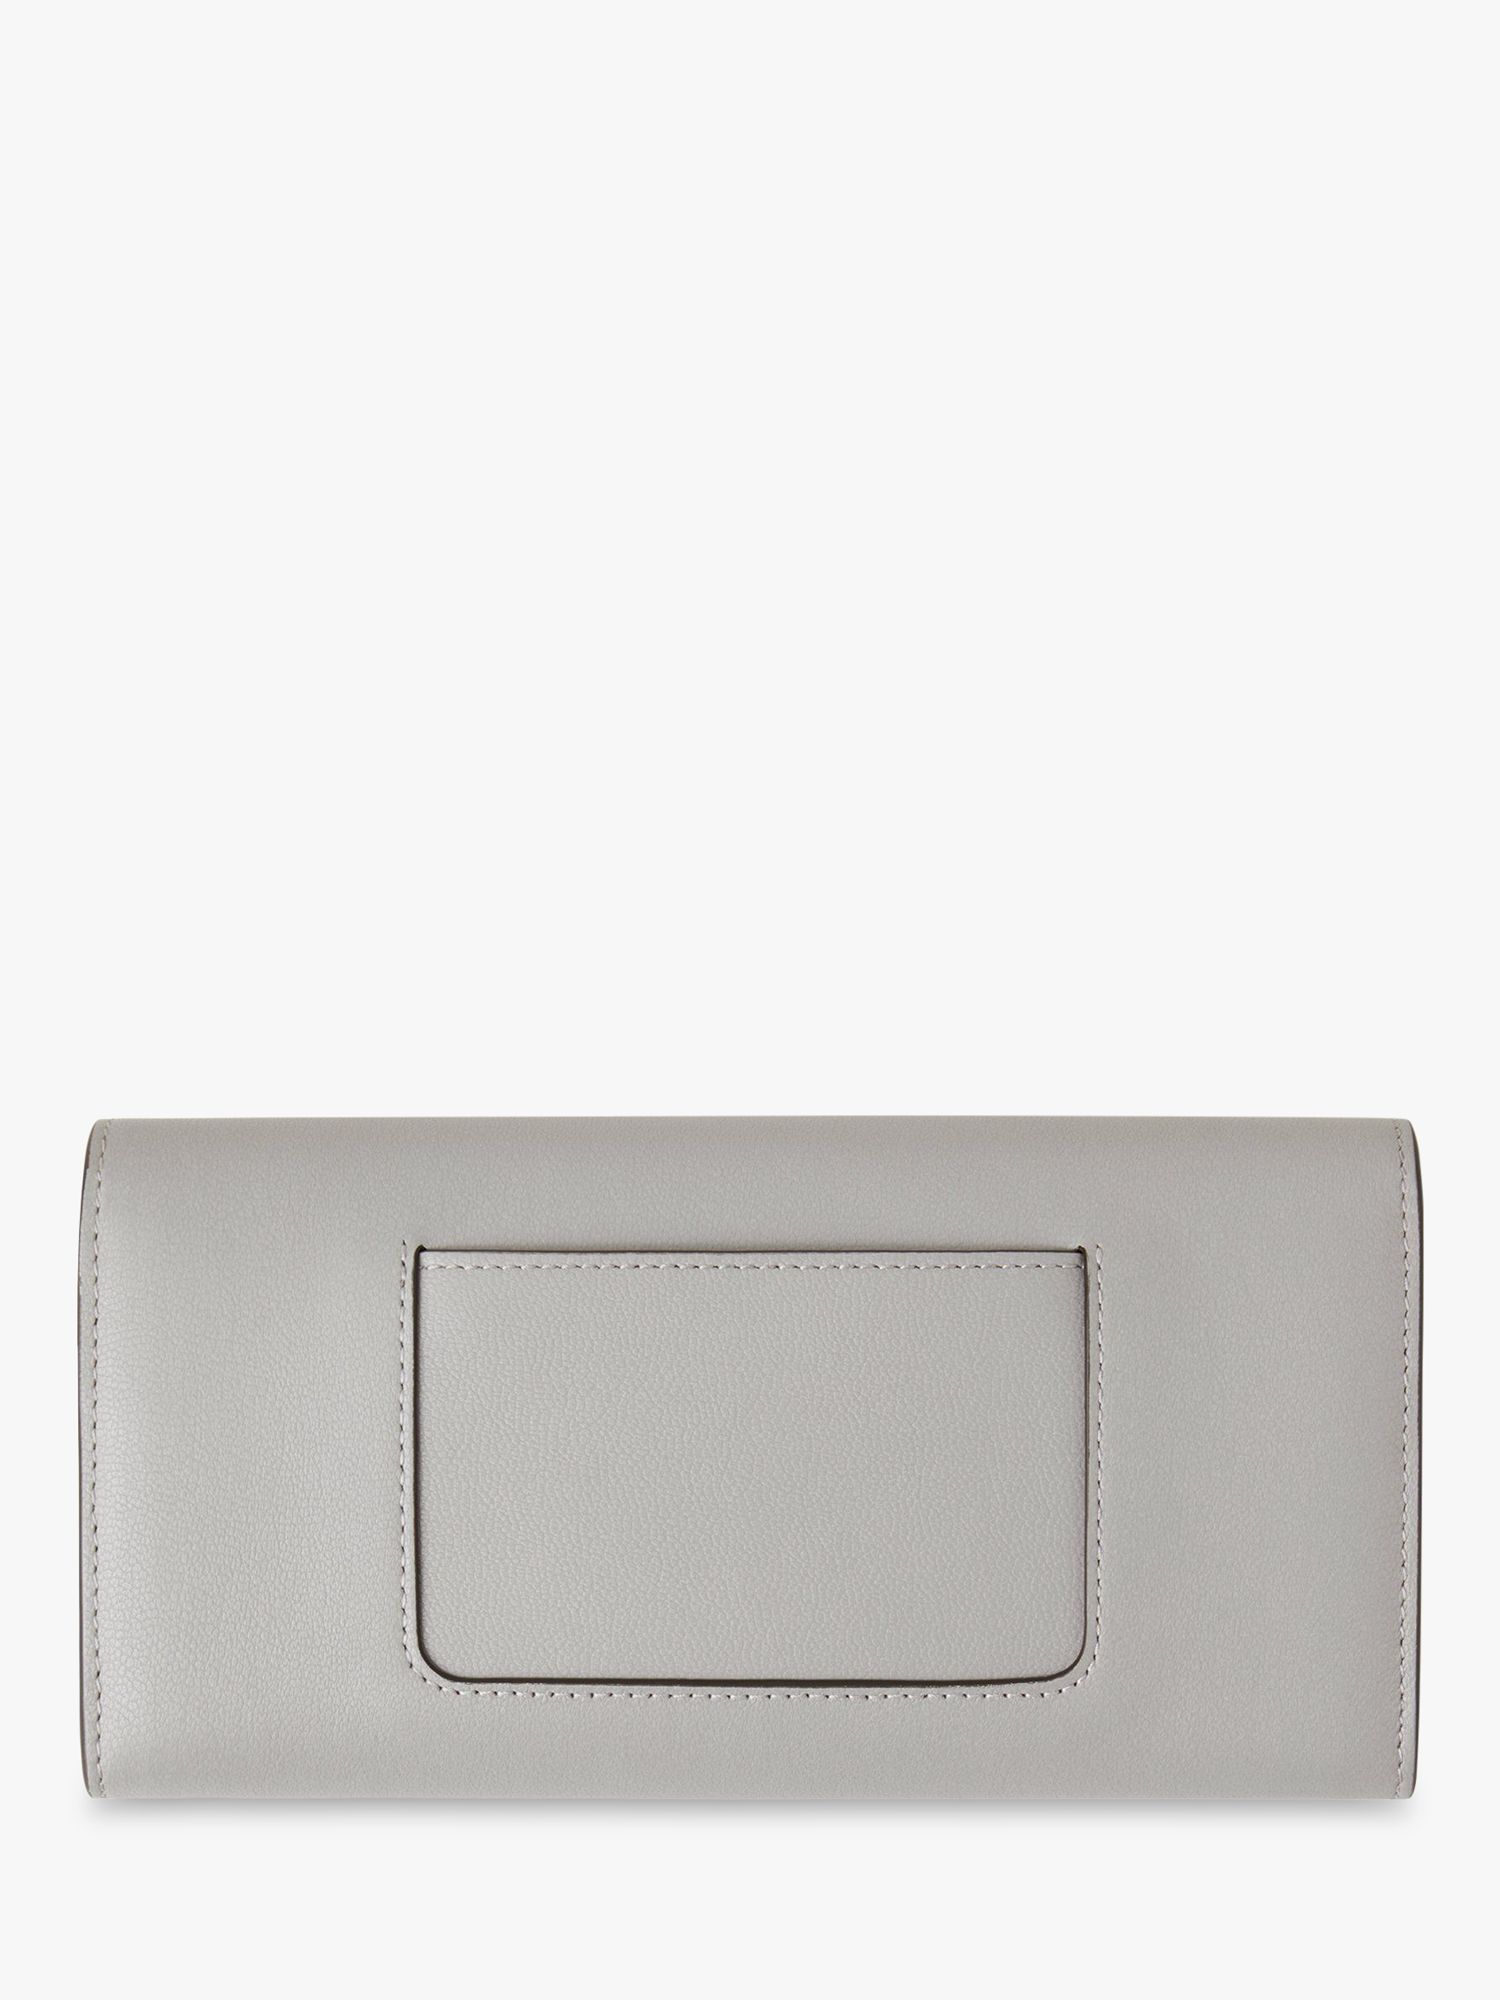 Buy Mulberry Darley Micro Classic Grain Leather Wallet Online at johnlewis.com